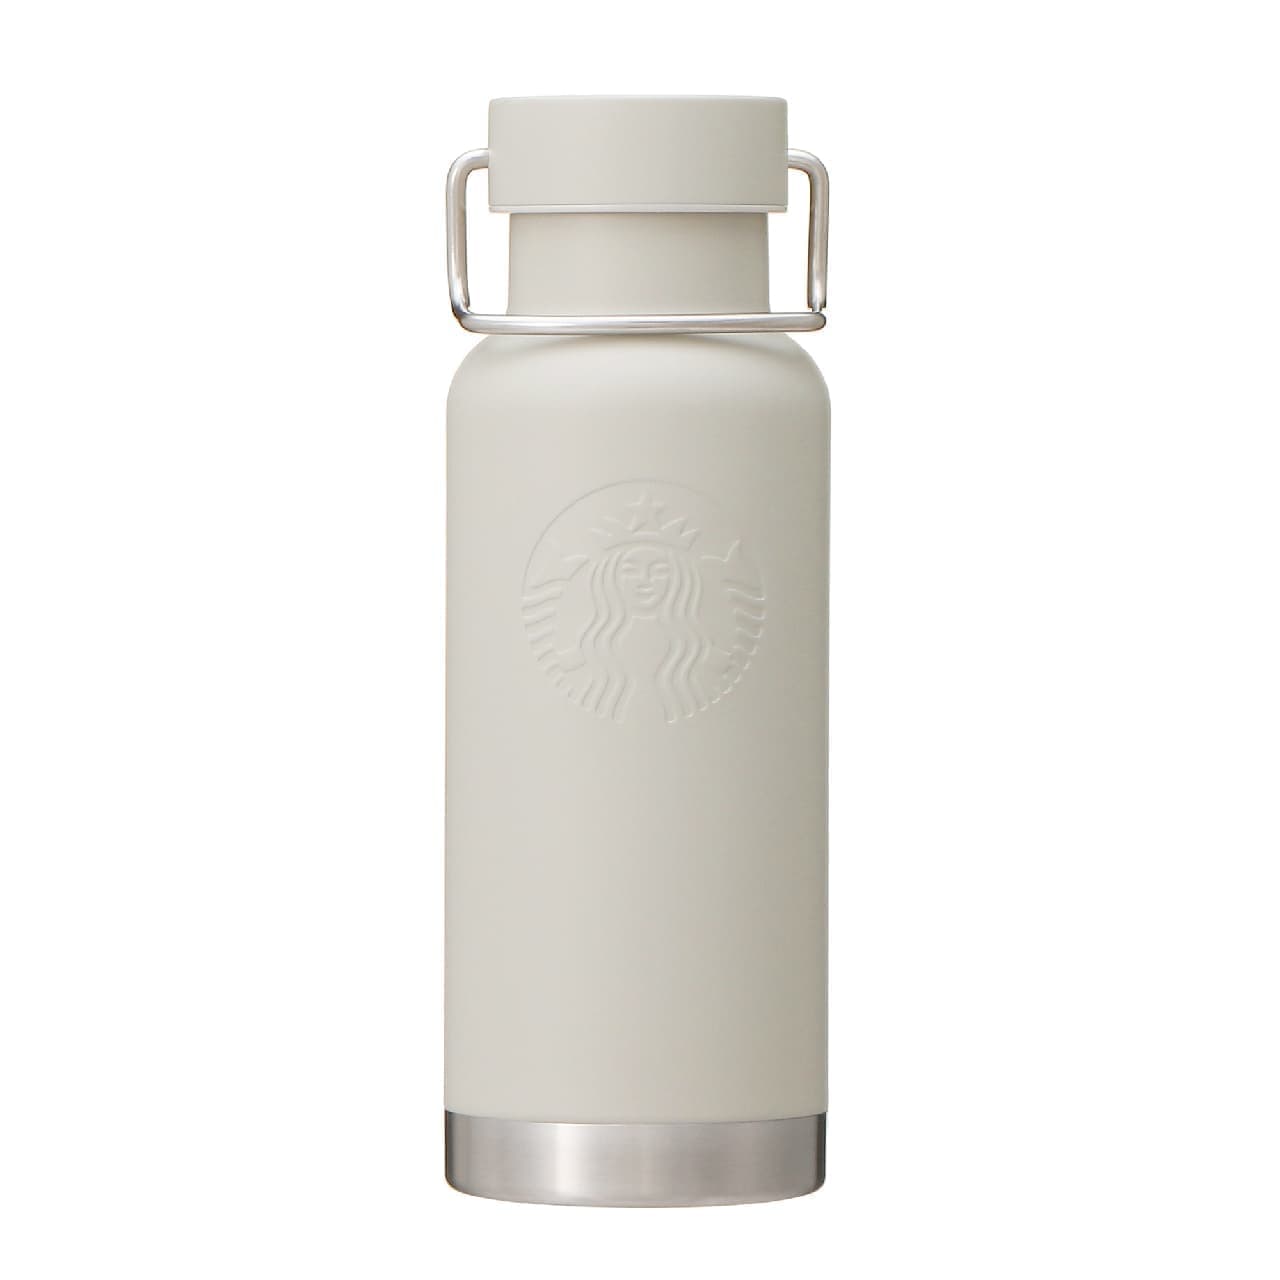 Starbucks cold cup glasses, stainless steel mini bottles, reusable straws & silicone cases, etc.